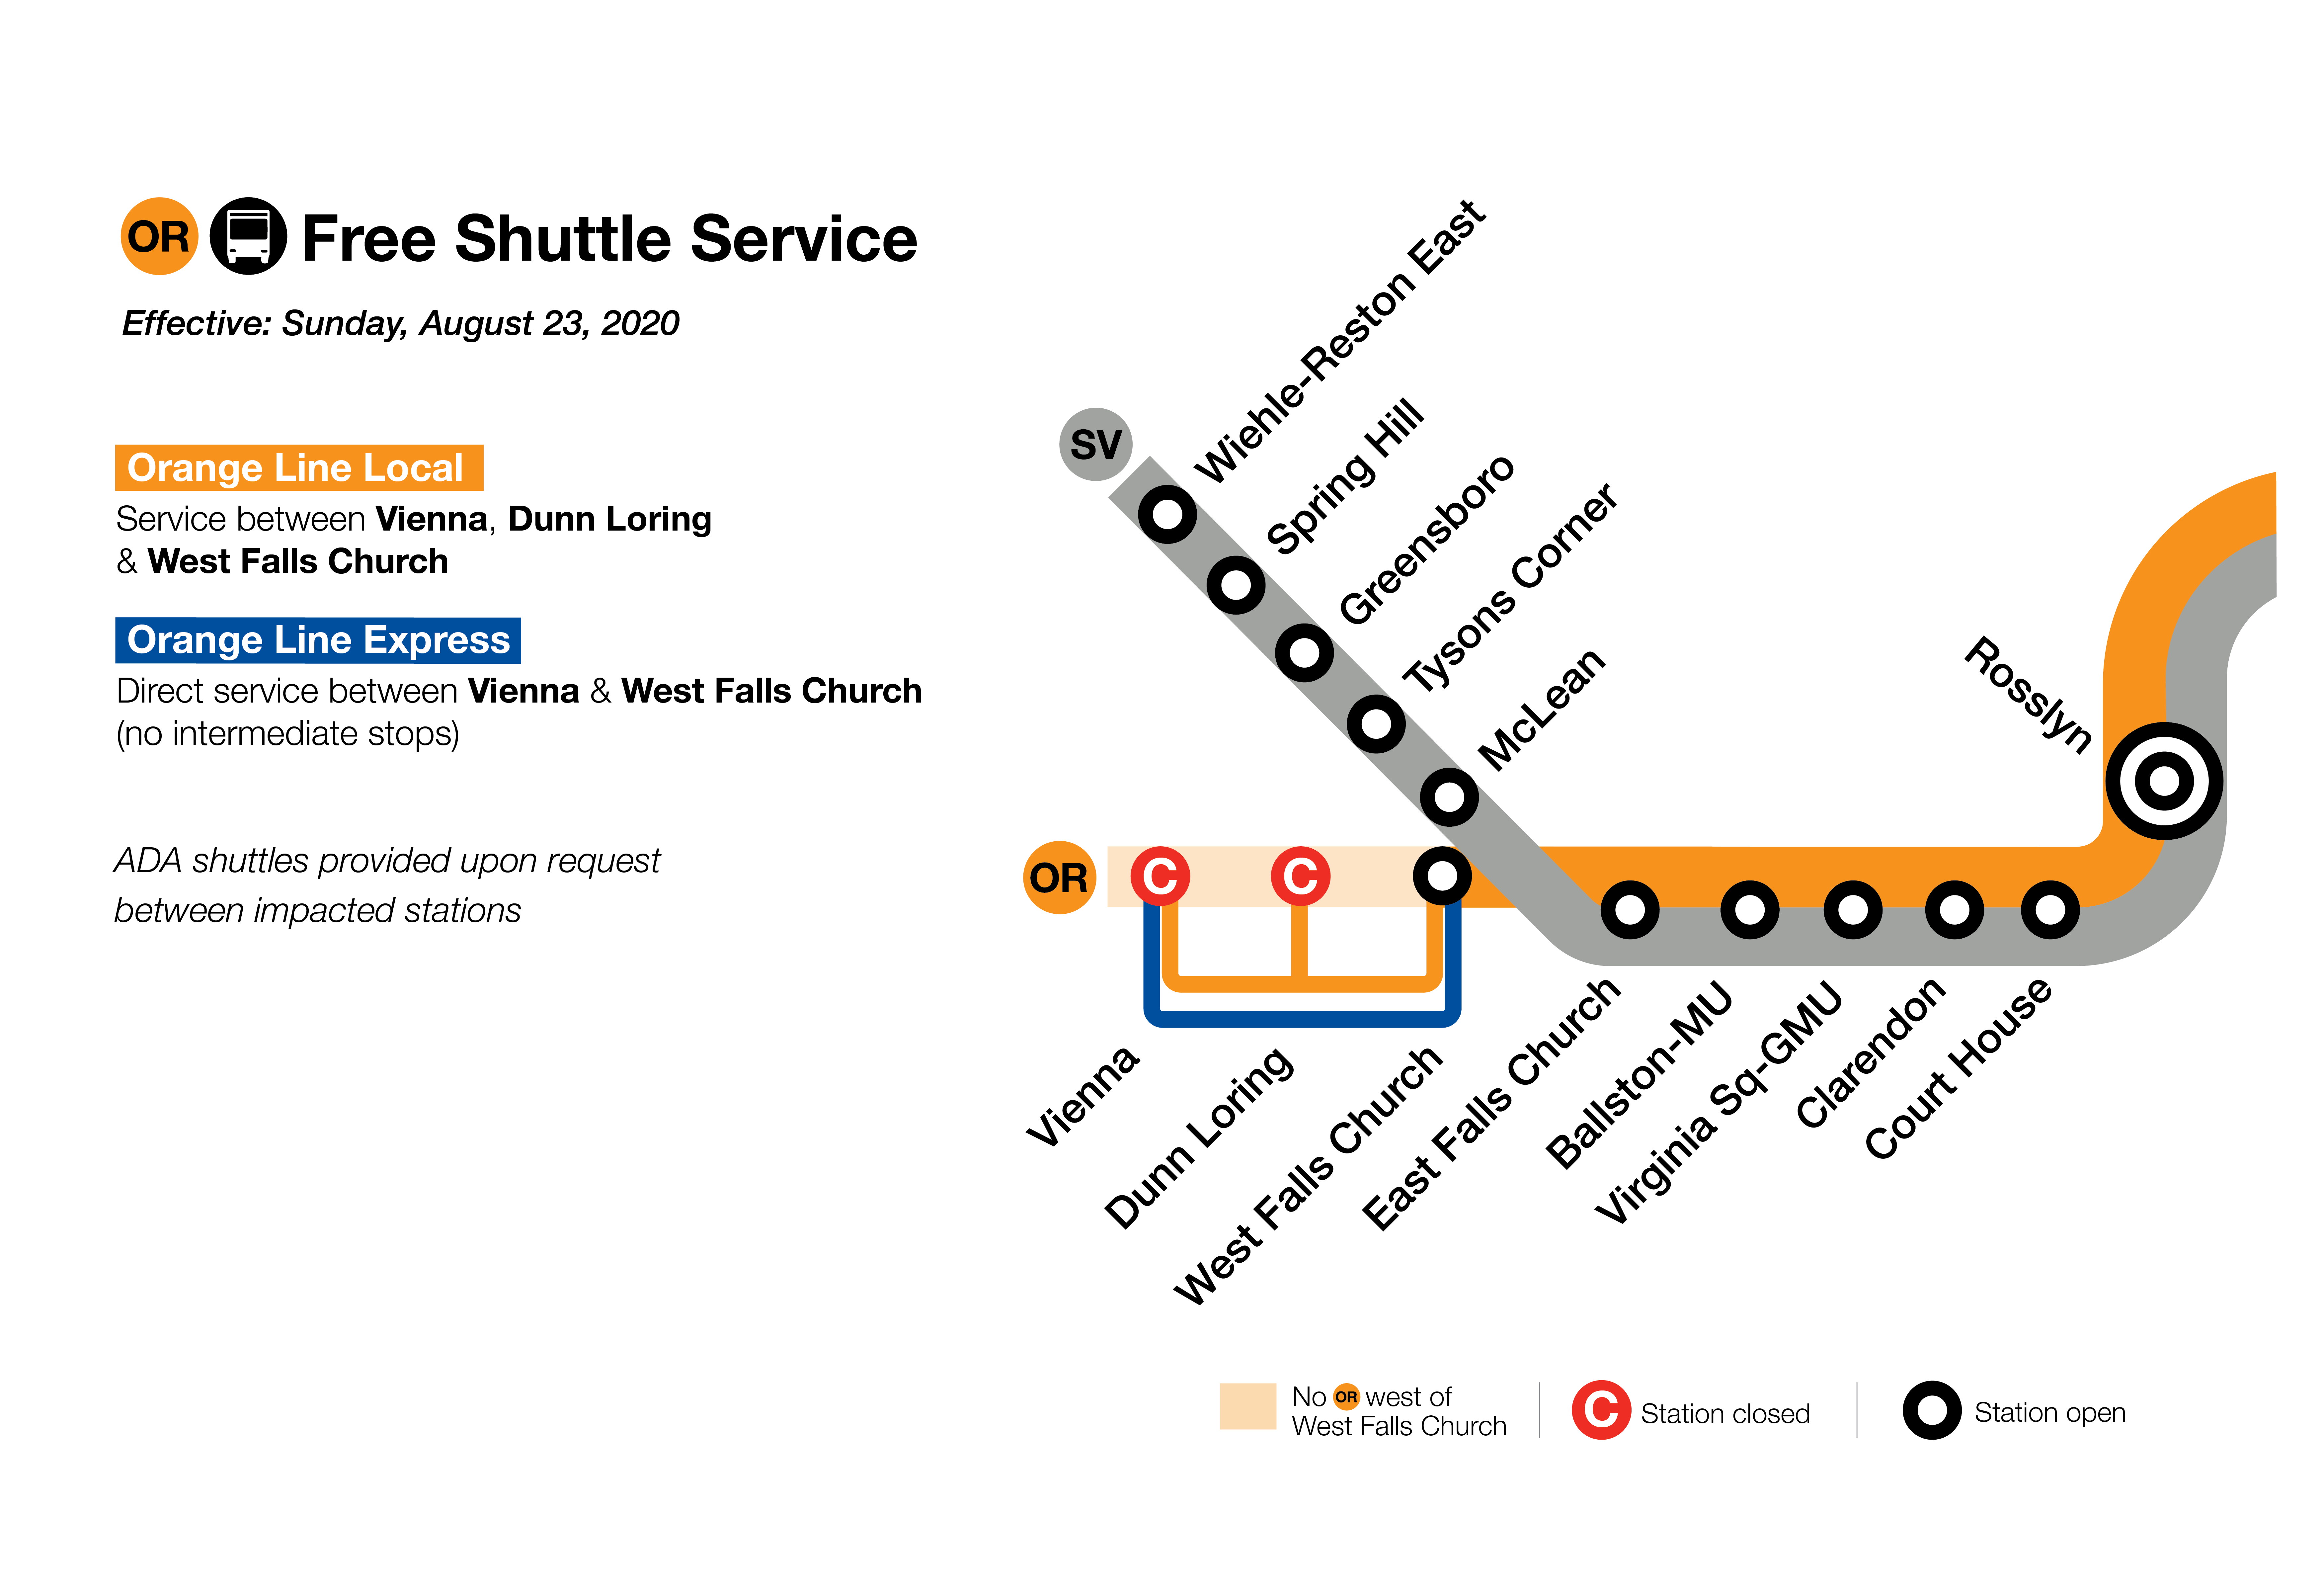 Orange Line Local service between Vienna, Dunn Loring & West Falls Church. Orange Line Express service between Vienna & West Falls Church. ADA shuttles are available upon request and provide service between the impacted stations.